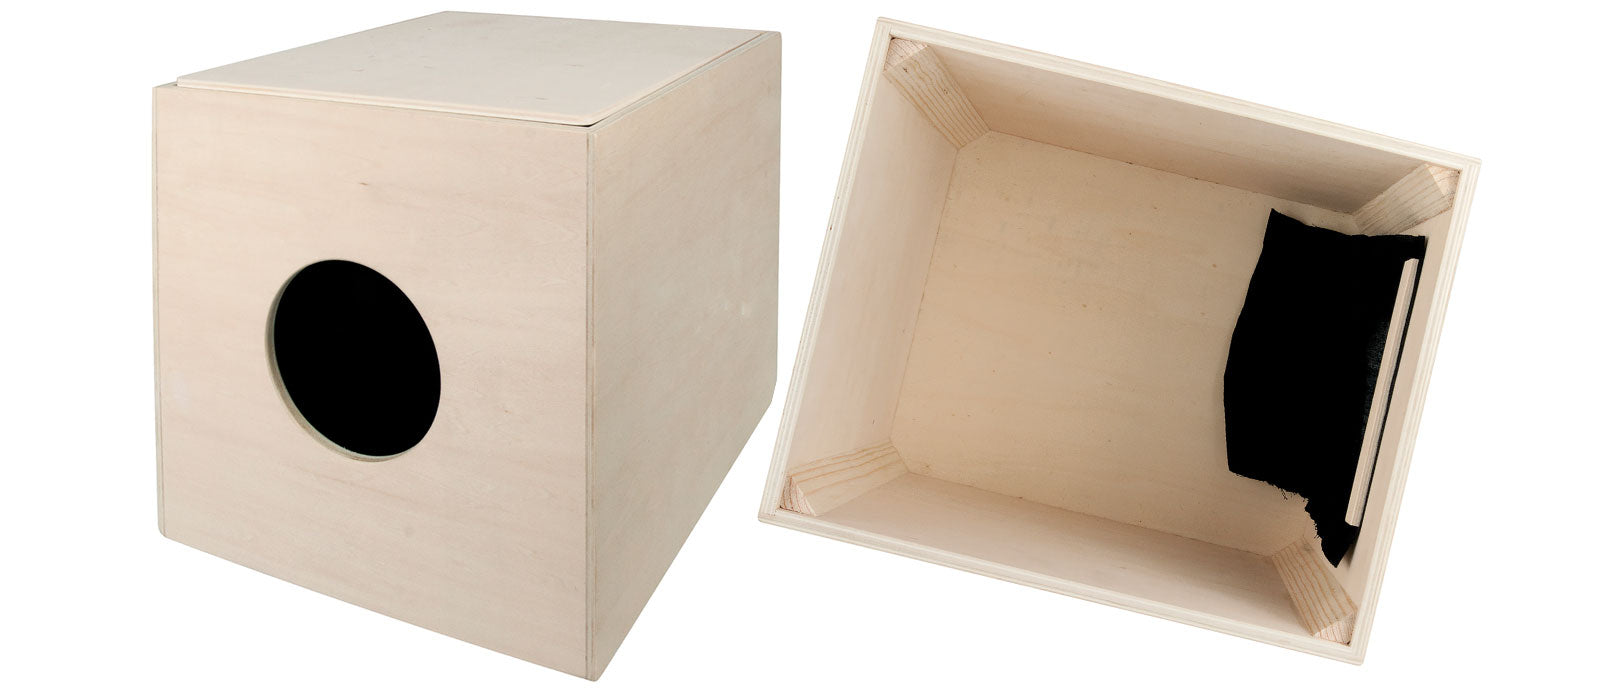 Feely Boxes